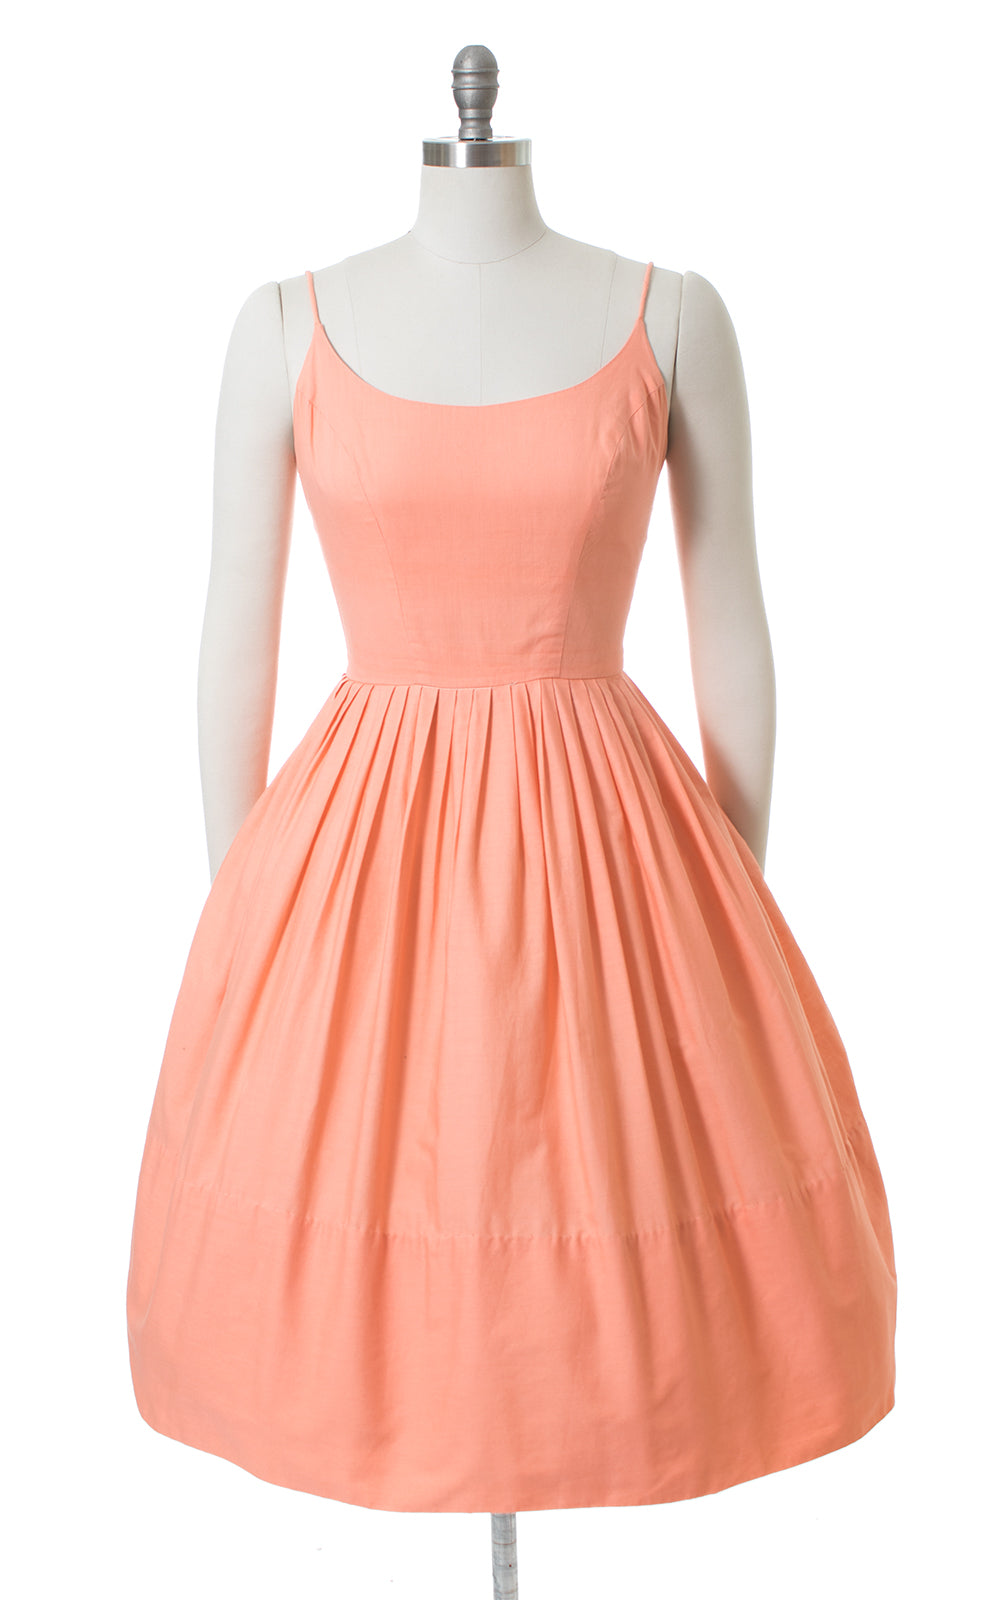 1950s Frederick's of Hollywood Peach Cotton Sundress